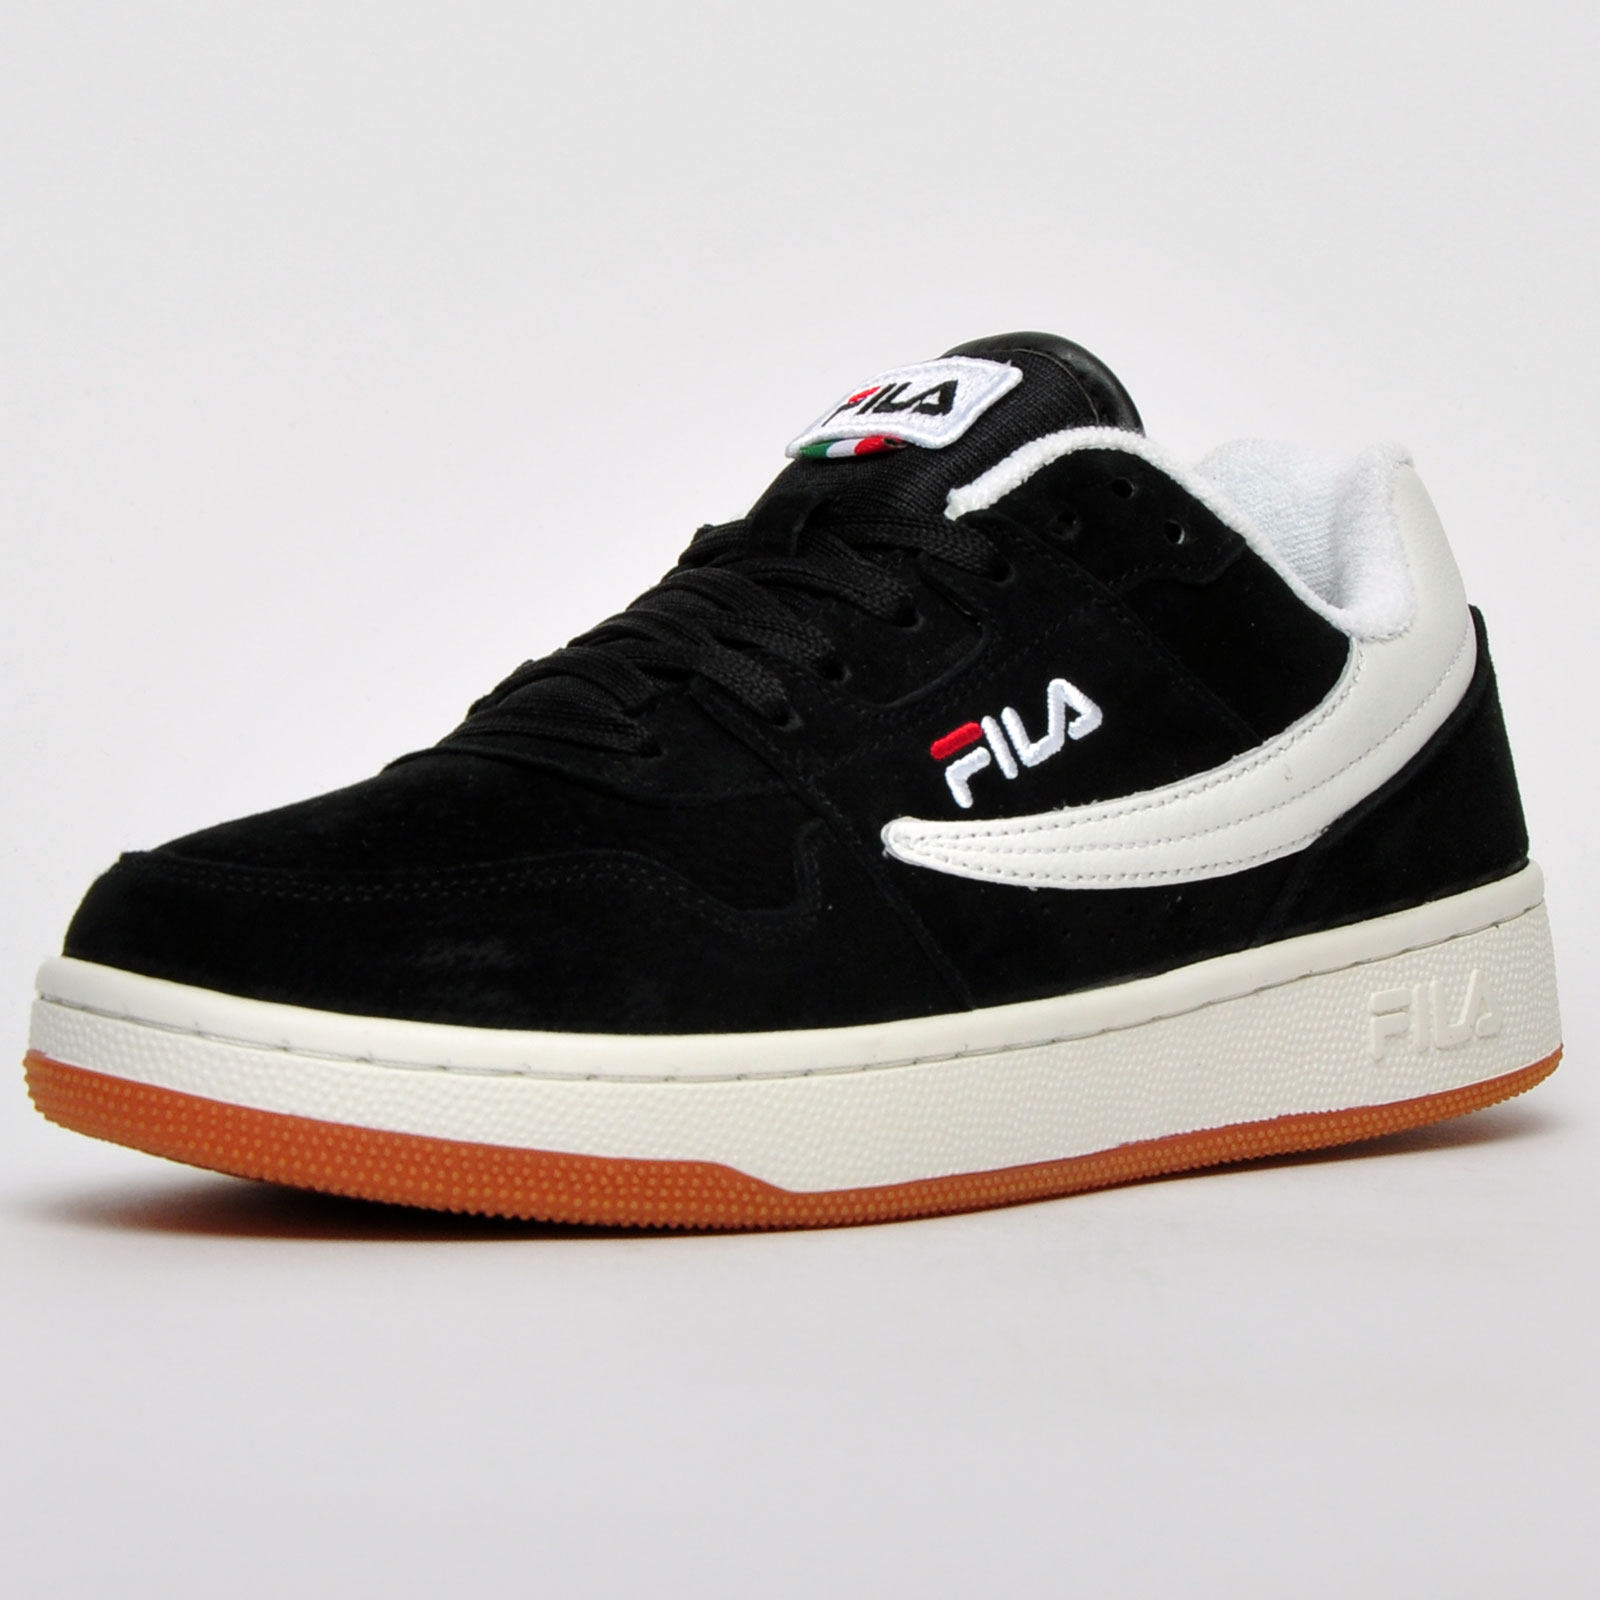 Fila Arcade Heritage Low Mens Classic Casual Suede Leather Sneakers ...